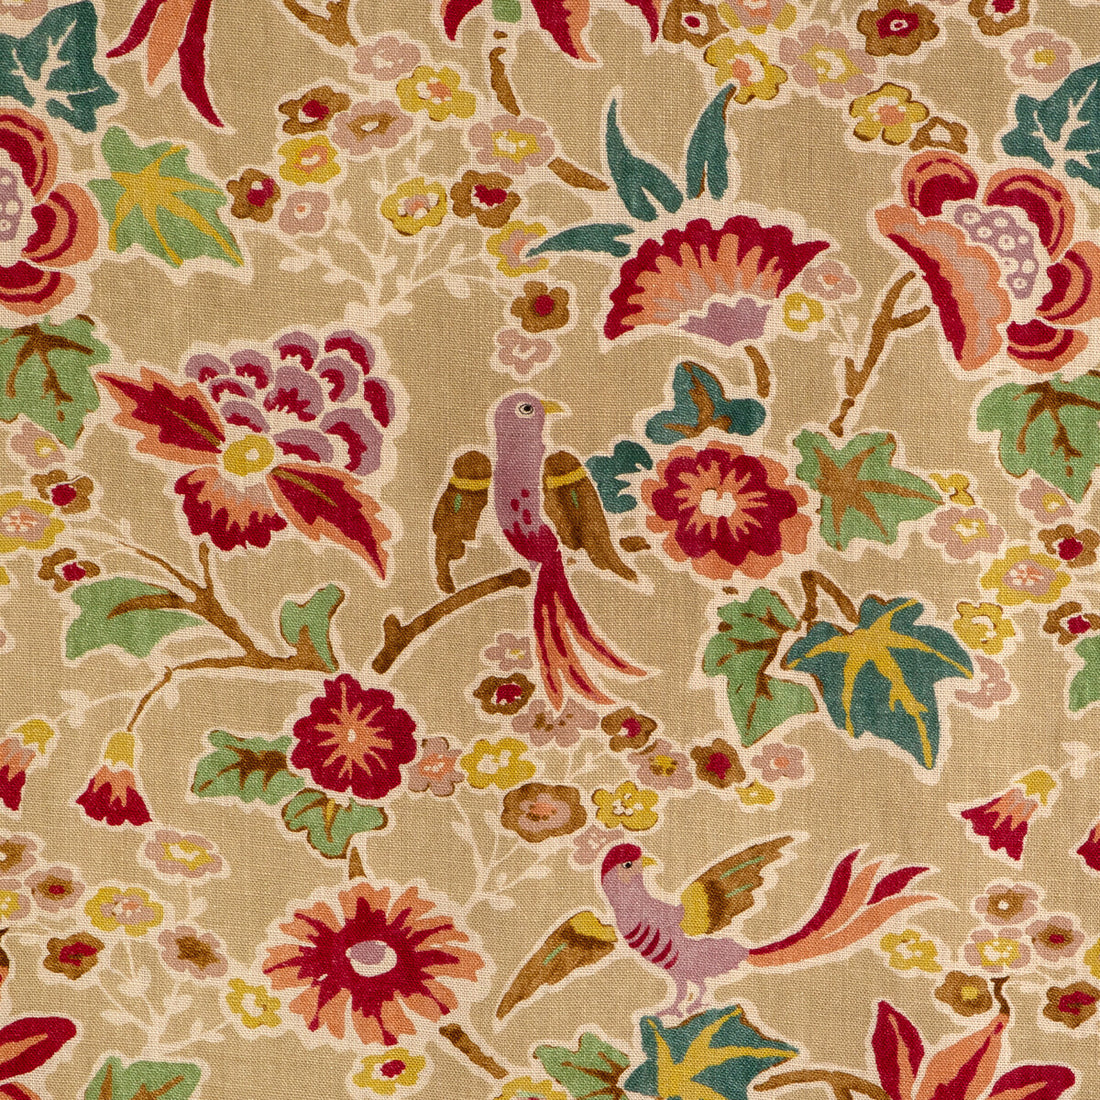 Posy Print fabric in berry/leaf color - pattern 2023142.73.0 - by Lee Jofa in the Garden Walk collection